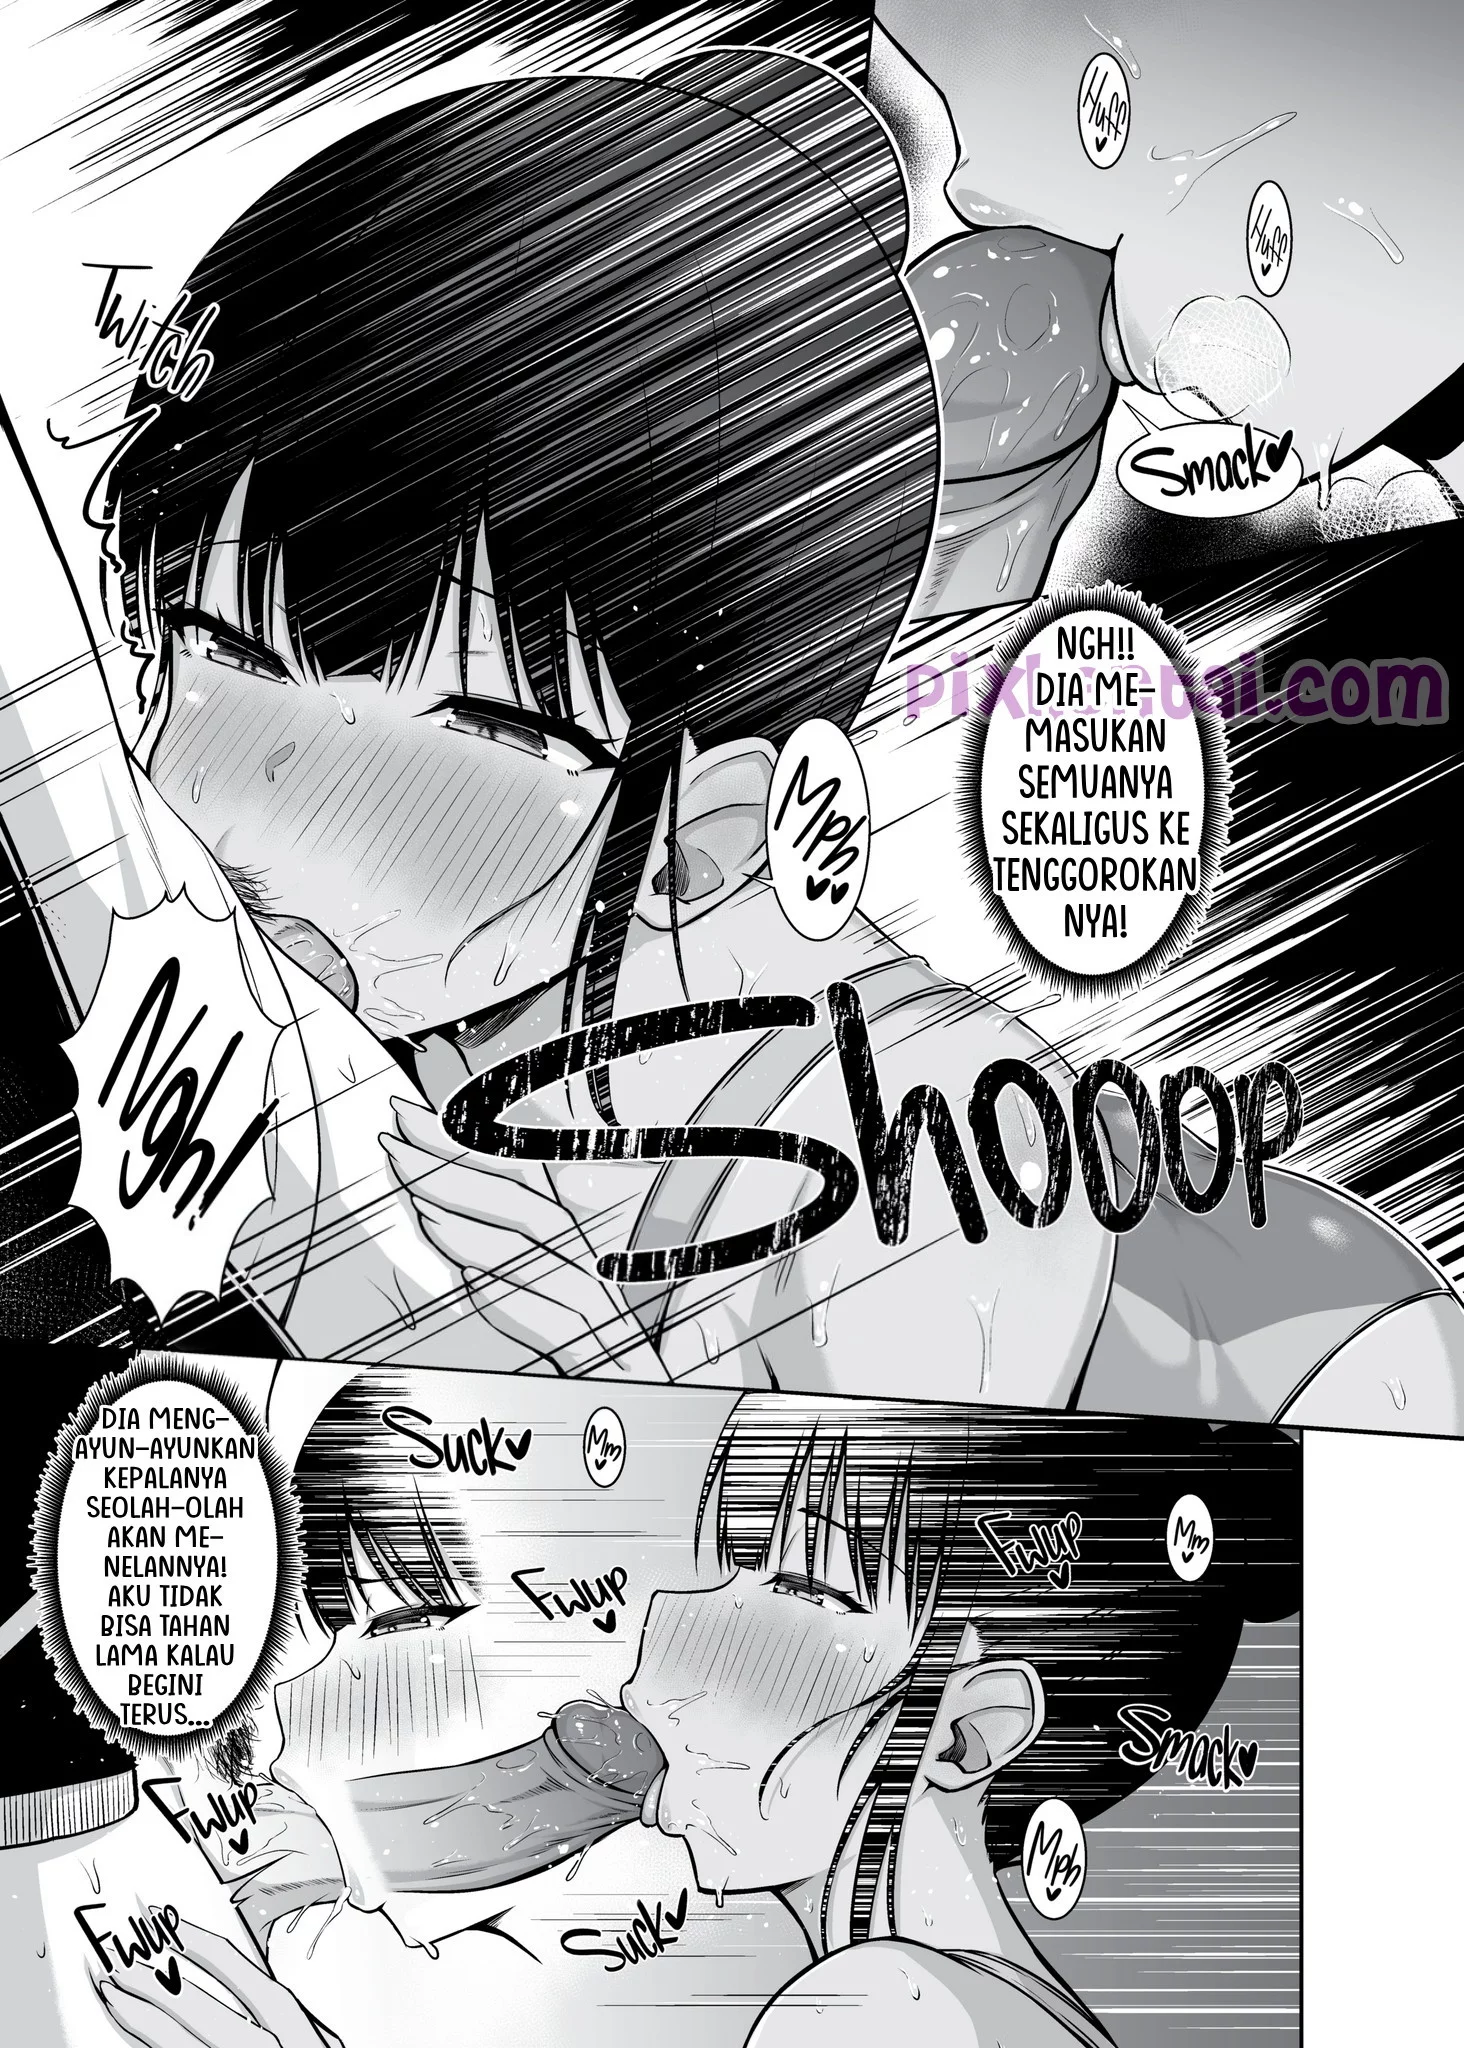 Komik hentai xxx manga sex bokep The Cool Beauty from the Swim Club is Mad about Sex 6